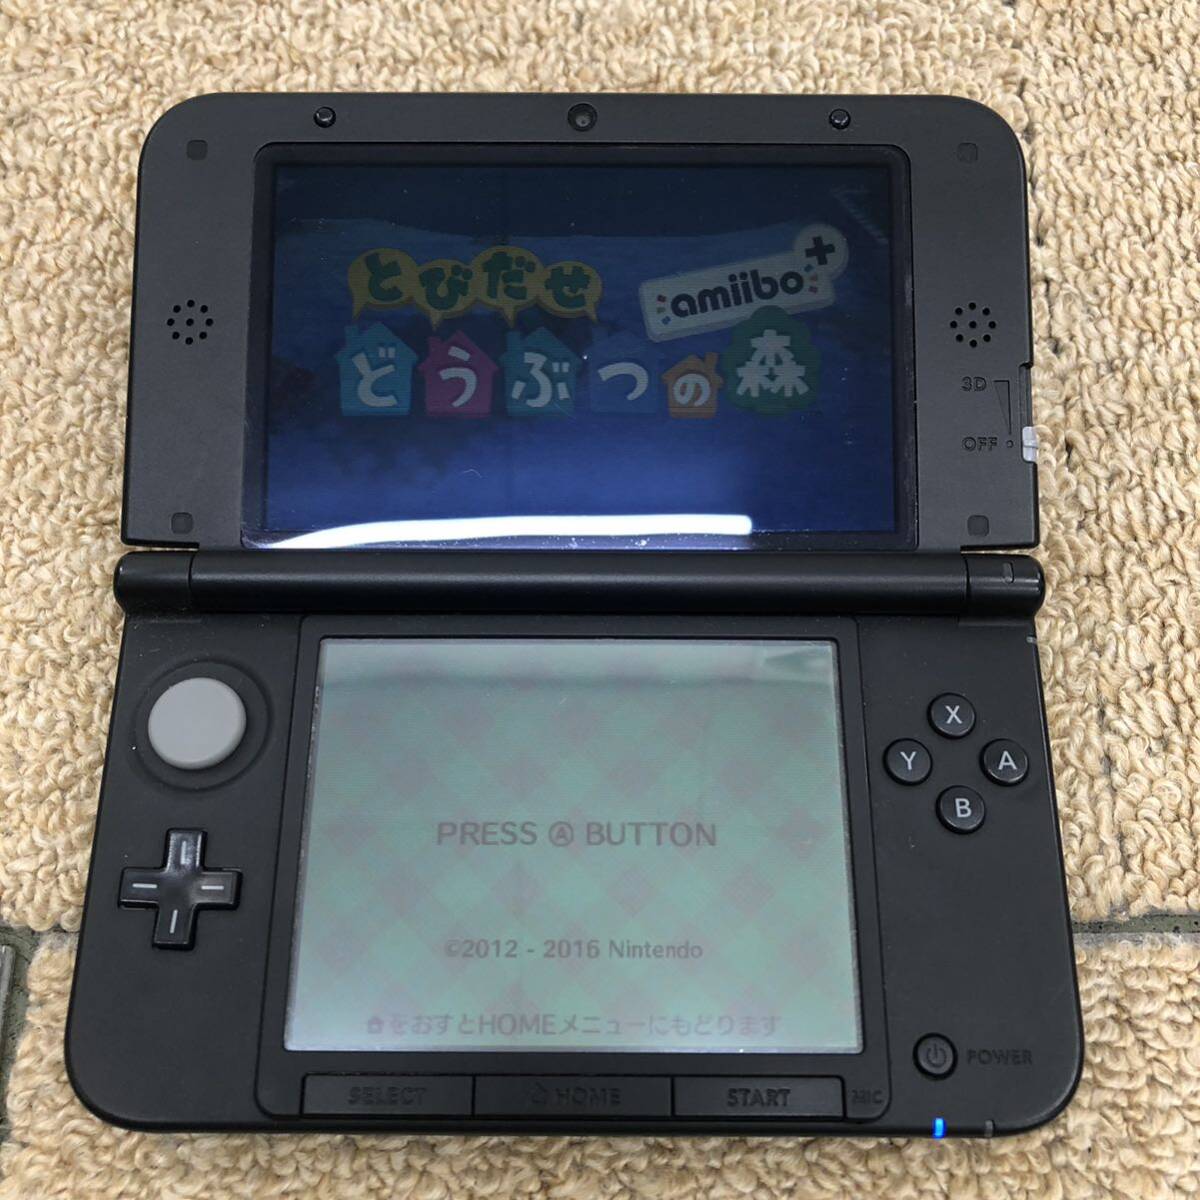 &[ selling out ]Nintendo nintendo Nintendo3DSLL SPR-001 black + soft set jump .. Animal Crossing amiibo + with charger . operation verification settled 